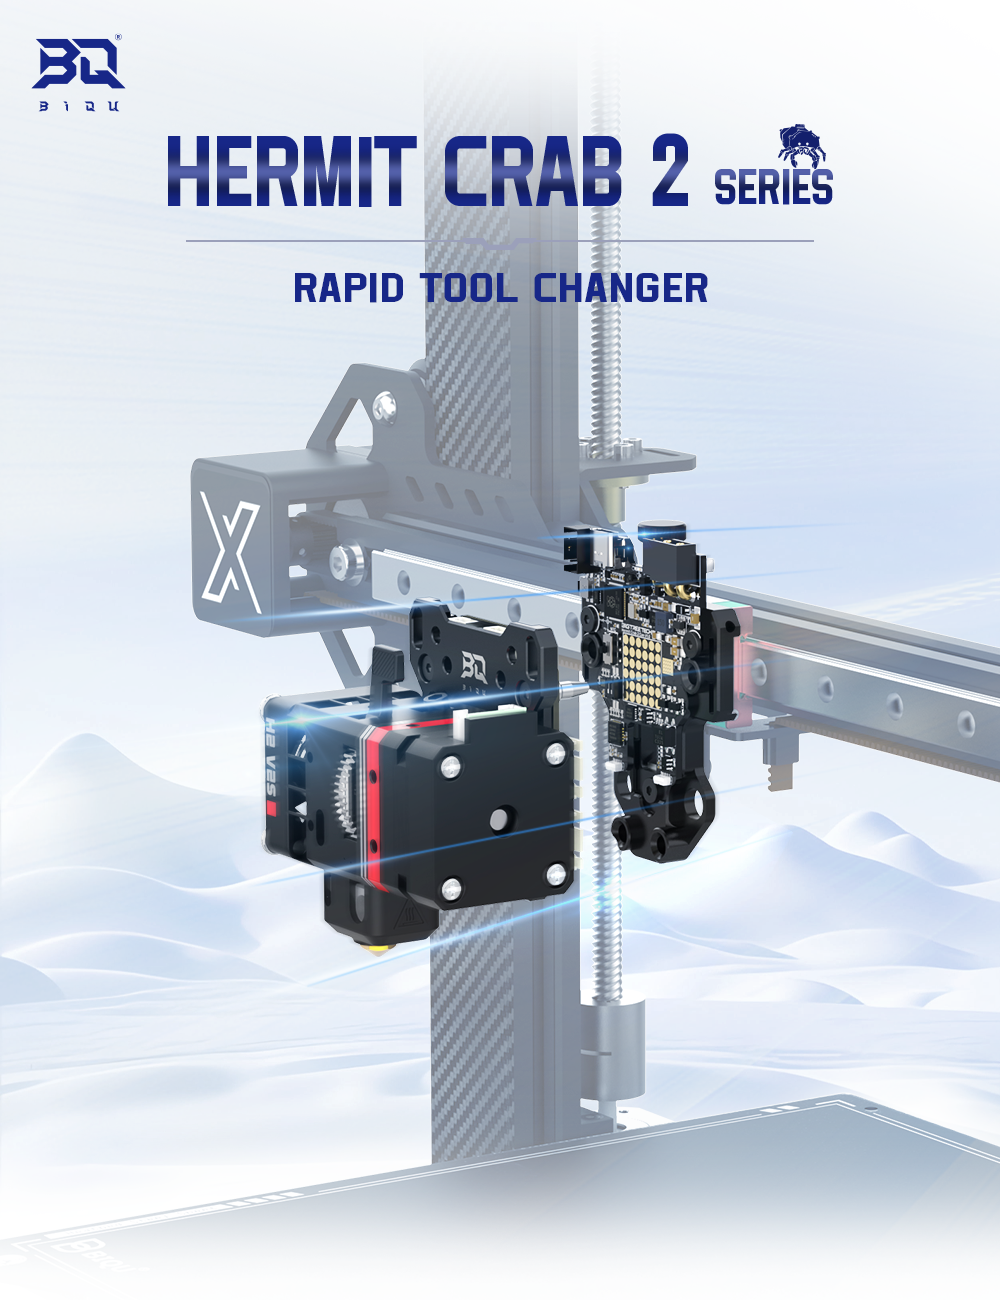 Hermit Crab 2 is a rapid tool changer for hotends.